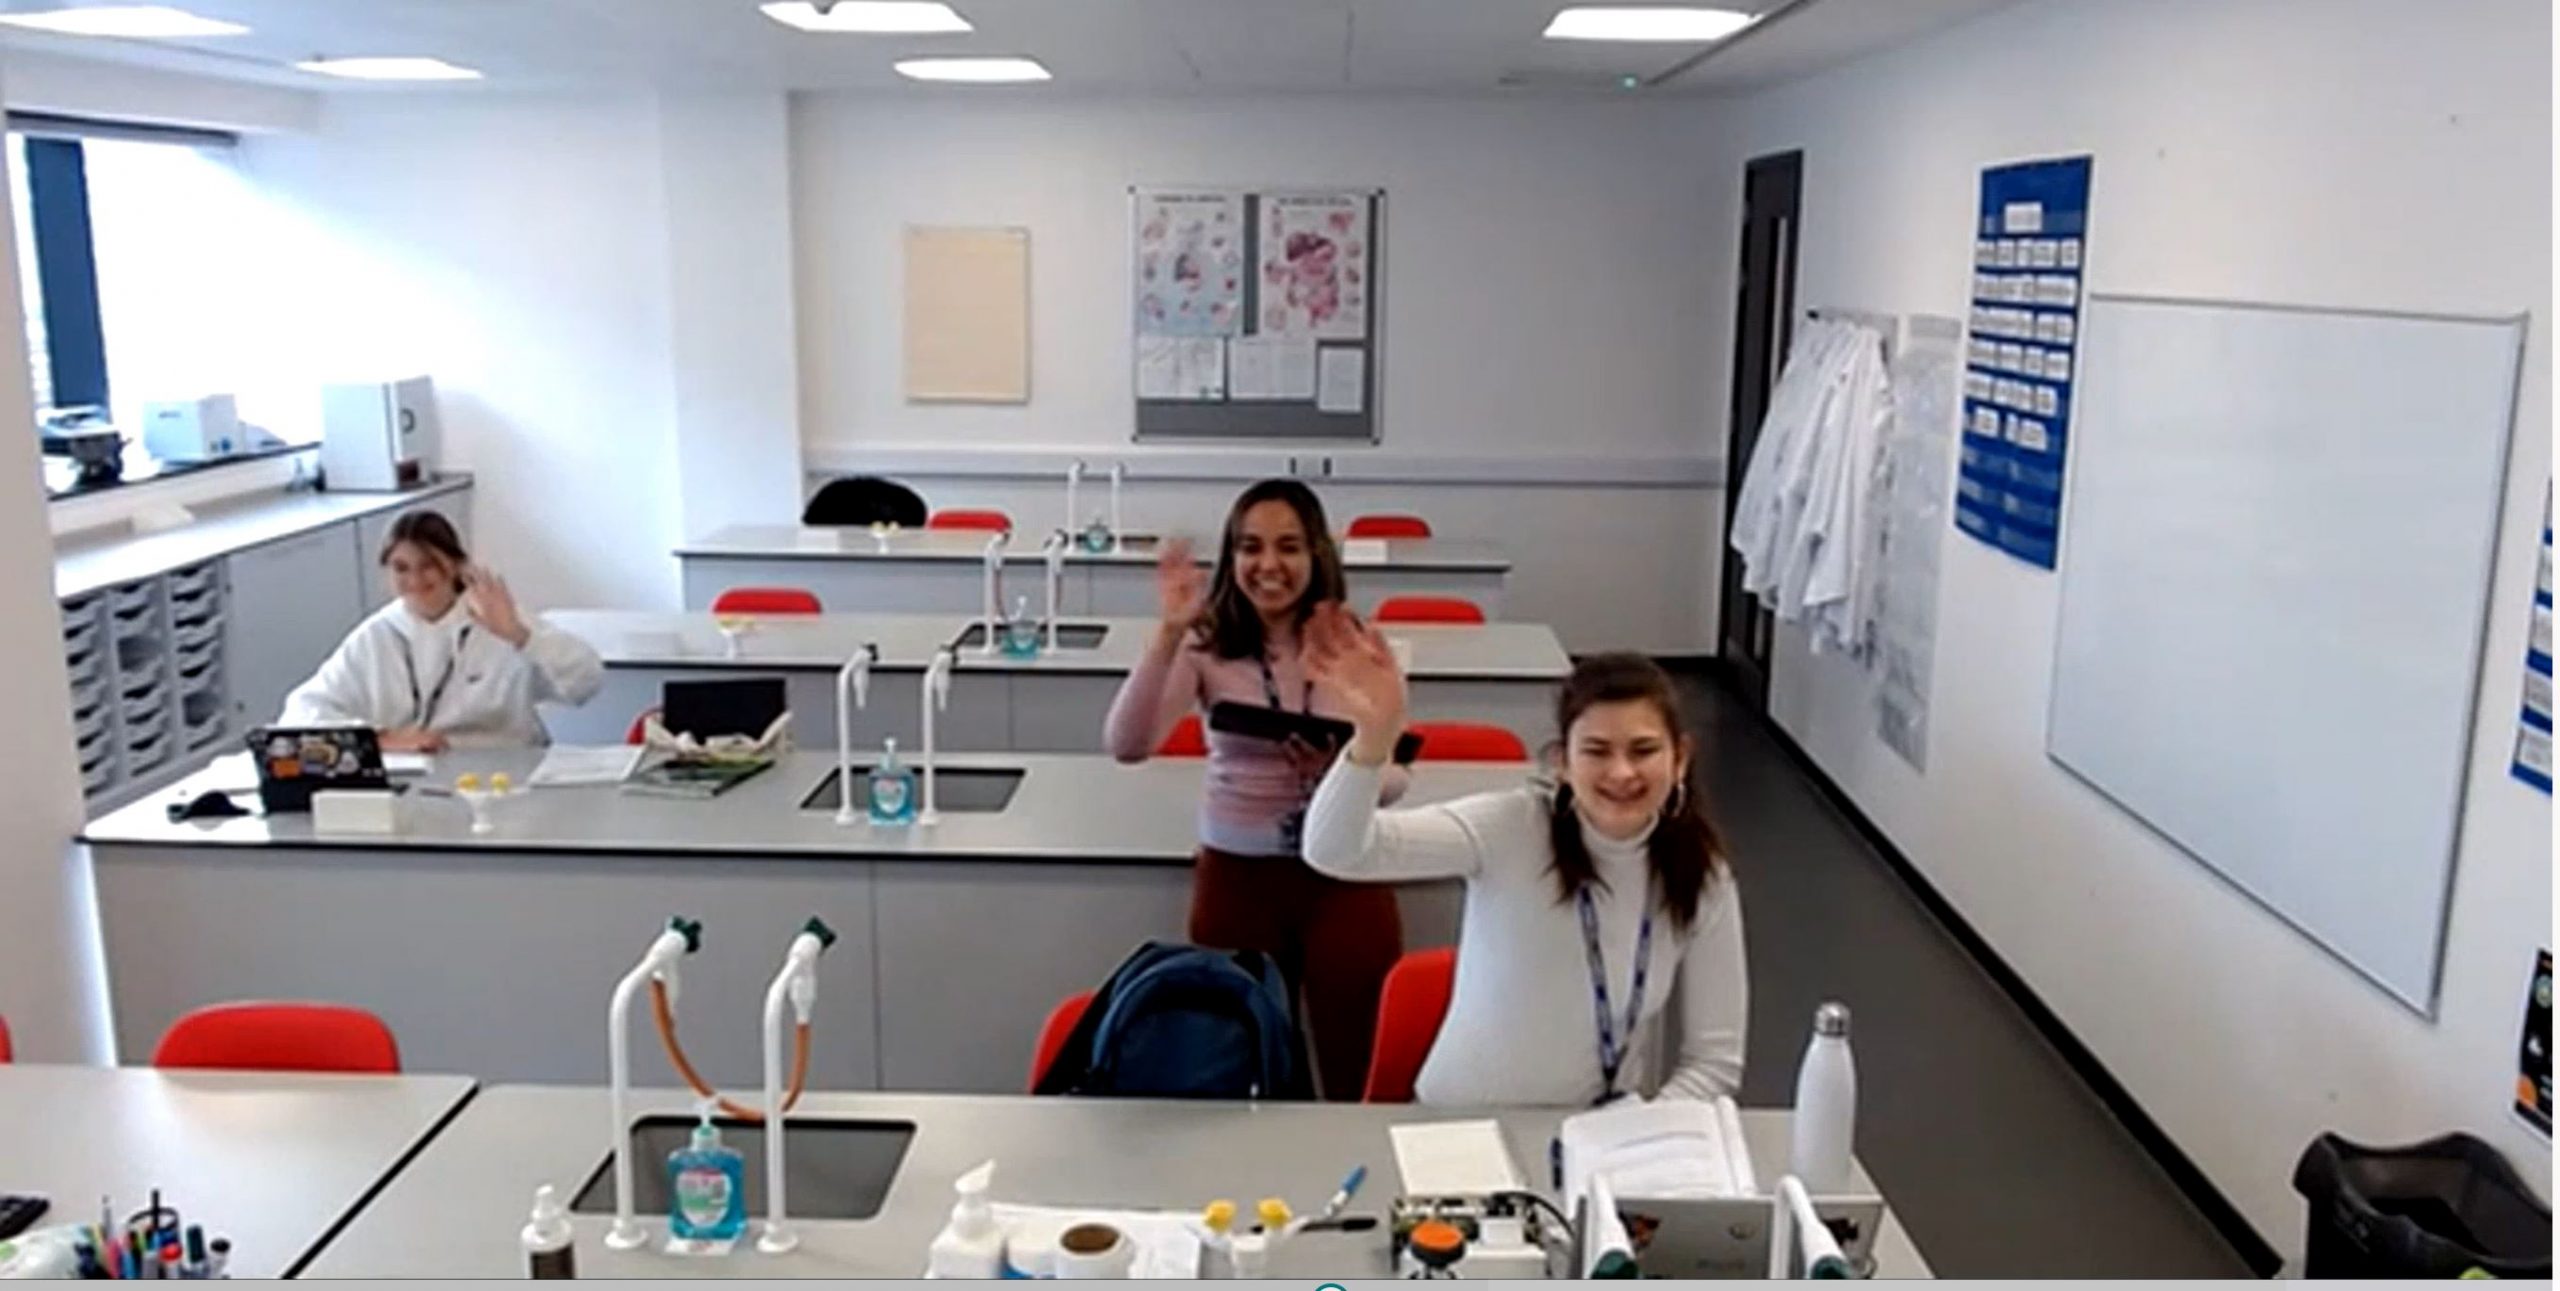 students waving in the lab room